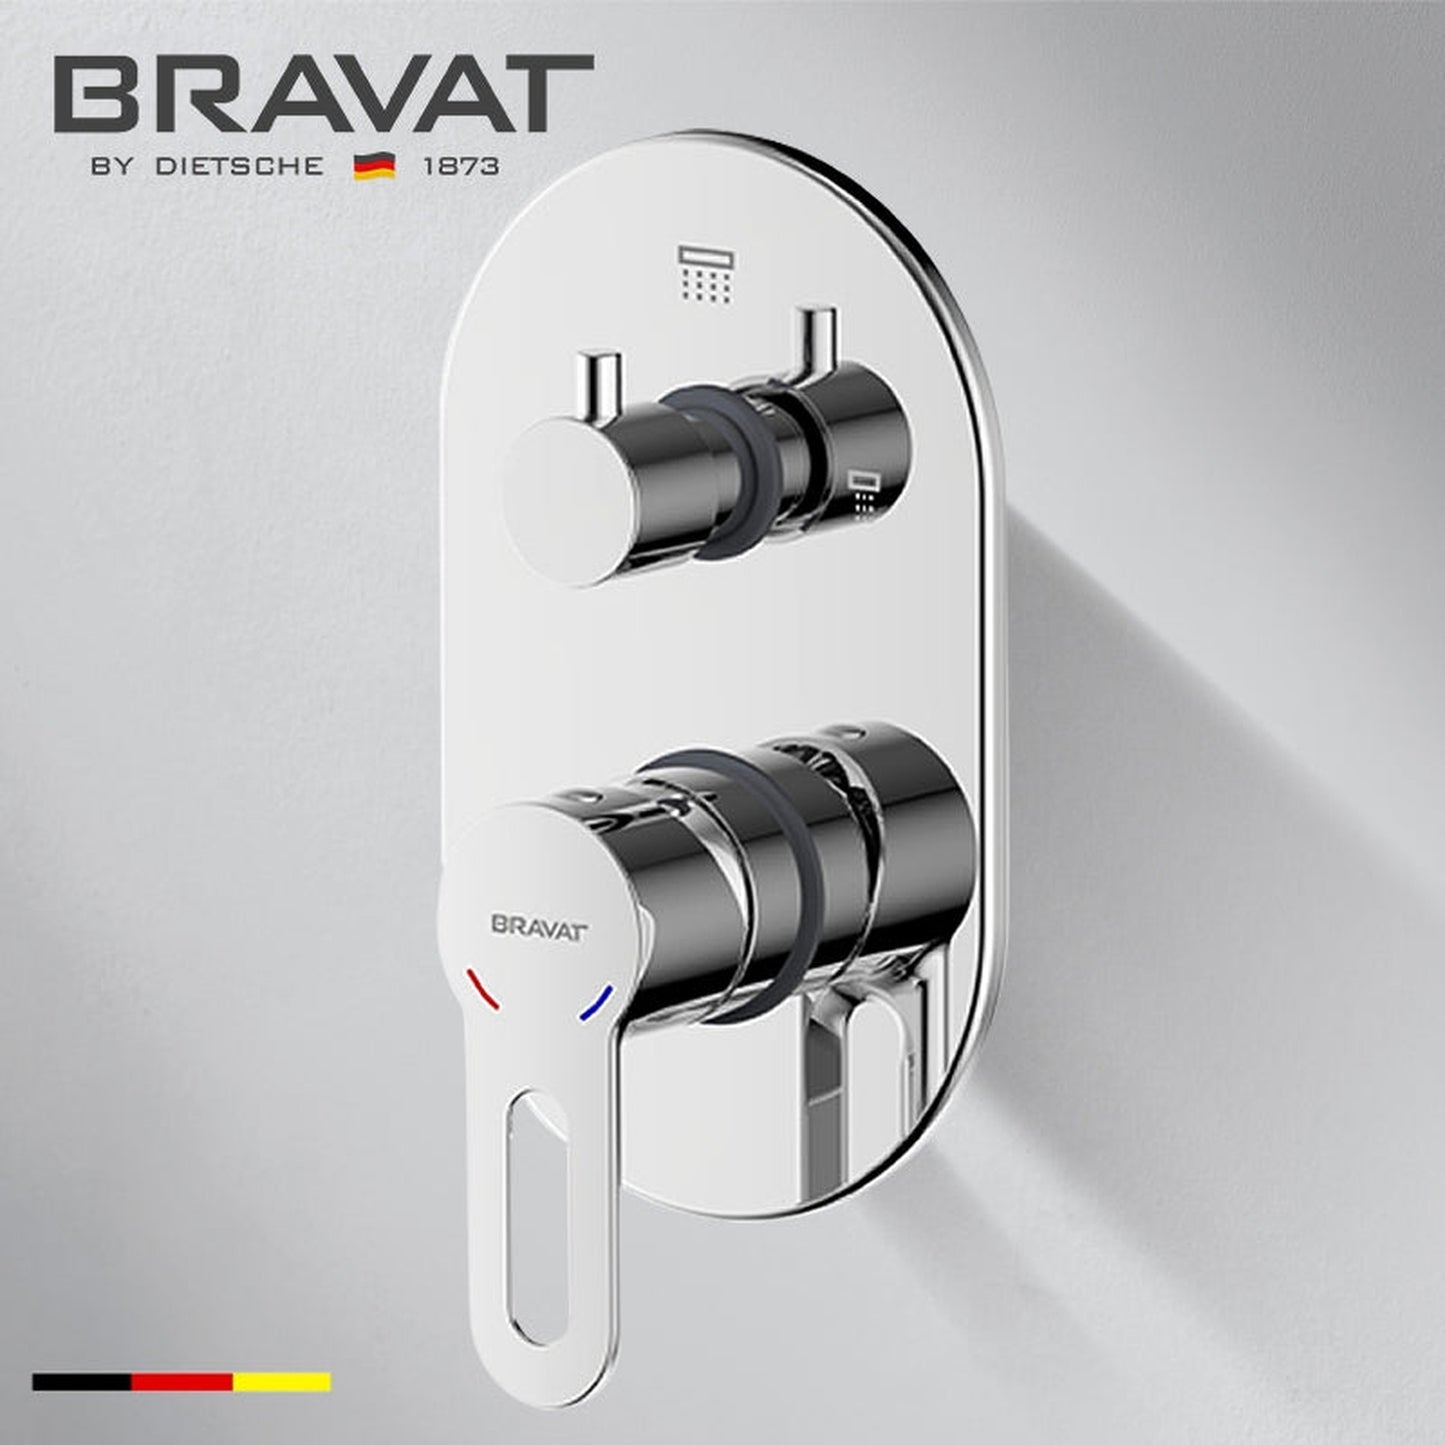 Fontana Bravat 8" Chrome Wall Mounted Thermostatic Rainfall Shower System With 3-Jet Body Sprays and Hand Shower